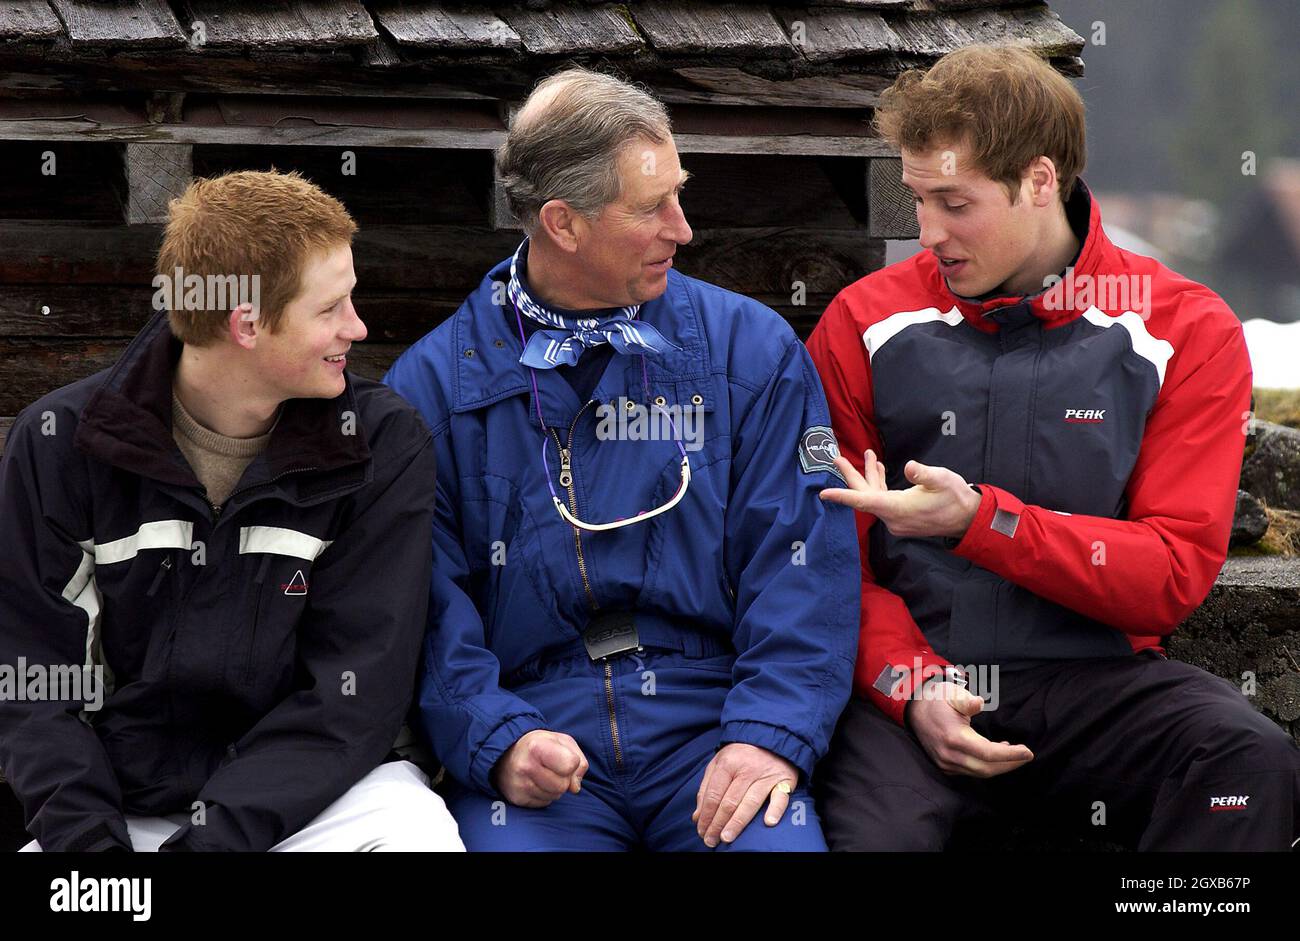 A grumpy Prince Charles,Prince of Wales looks as though he has pre wedding nerves  as he mutters rudely  about the press and then looks bemused when PrinceWilliam and Prince Harry point out that his microphone is on, during a photocall in Klosters, Switzerland on 31/03/05. Anwar Hussein/allactiondigital.com   Stock Photo